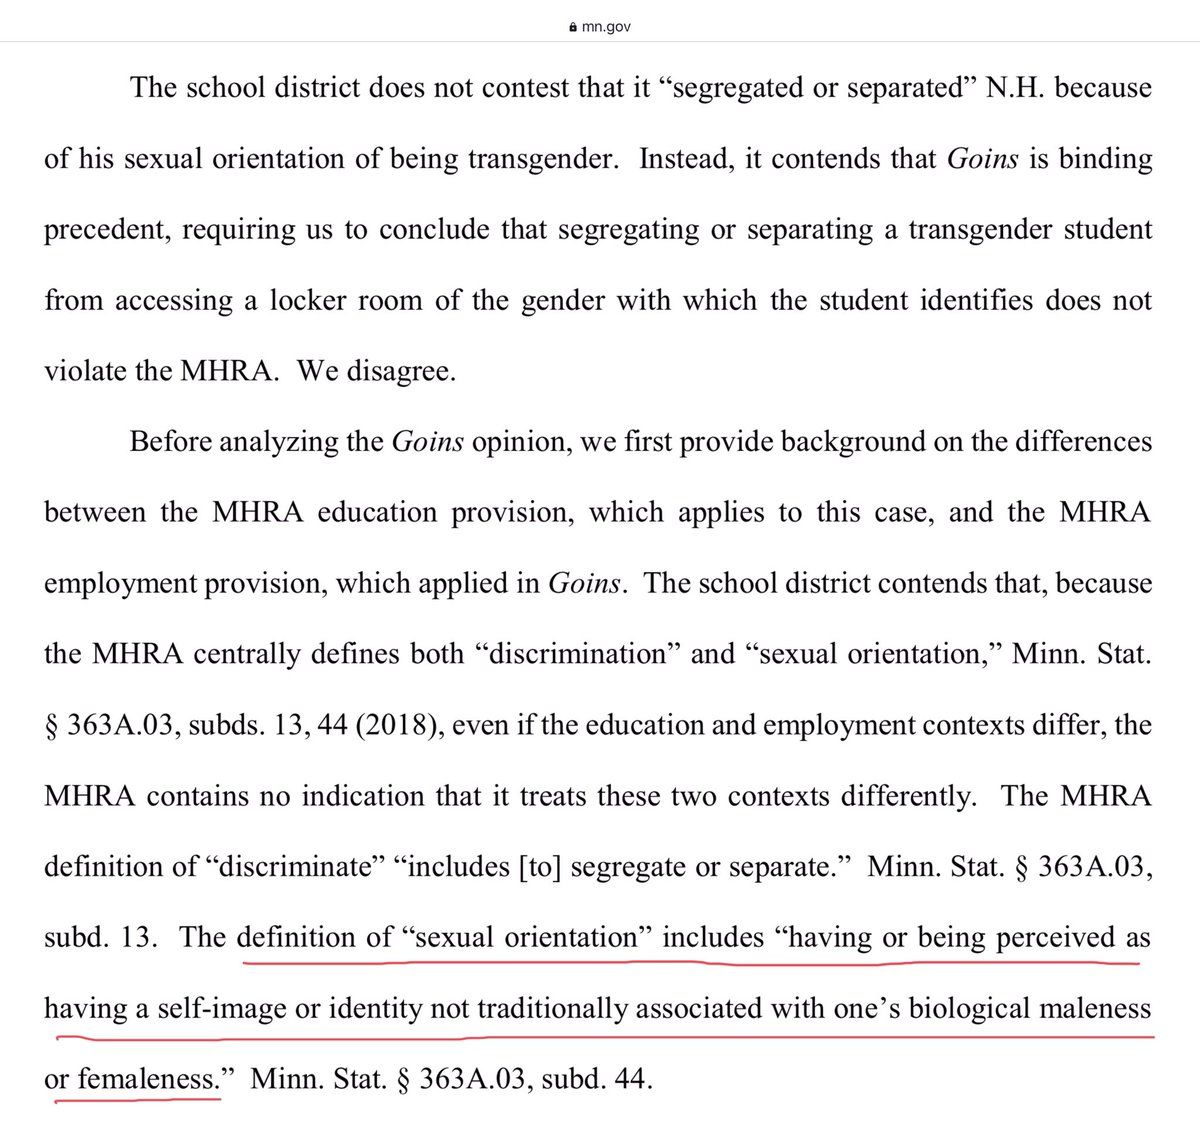 Minn. Stat. § 363 A.03, subd. 44, bizarrely, includes this in the definition of sexual orientation: “having or being perceived as having a self-image or identity not traditionally associated with one's biological maleness or femaleness.” https://www.revisor.mn.gov/statutes/cite/363A.03